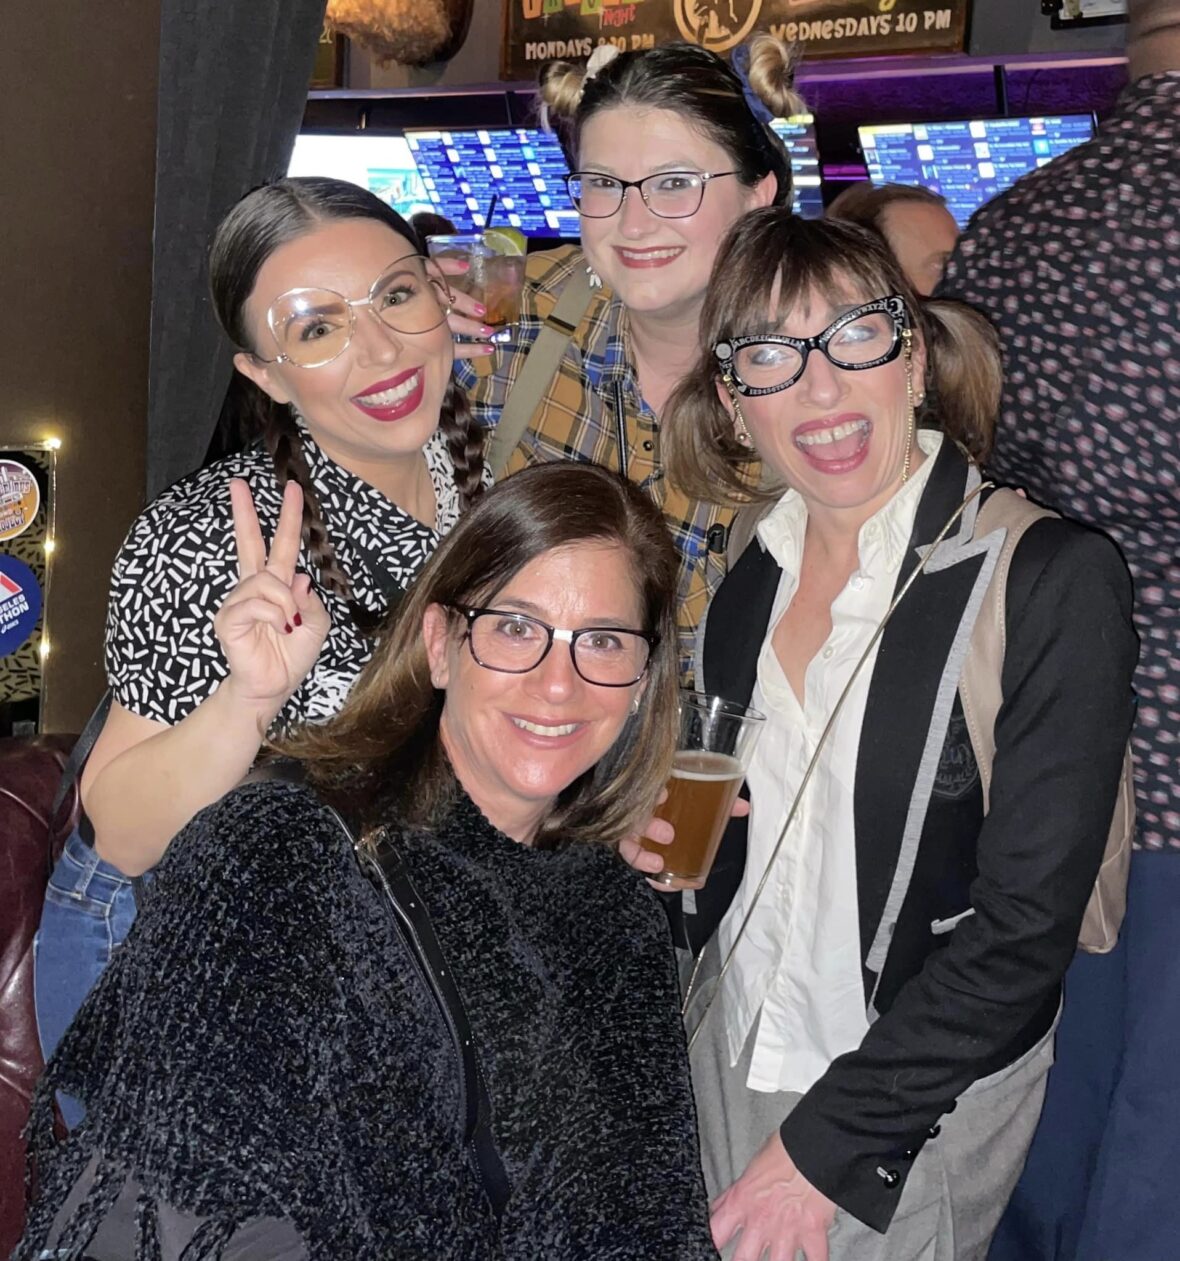 You are currently viewing Every year, I throw myself a ridiculous, themed birthday… This year’s “Genius Edition” was no exception. Naomi’s nerds TURNED OUT Monday night, and killed that pub trivia! Thank you, dorks, for indulging me with your geeky glasses and pencil protectors. You made my day! 🤓💕🍾🥂 Photos courtesy of James Franklin.